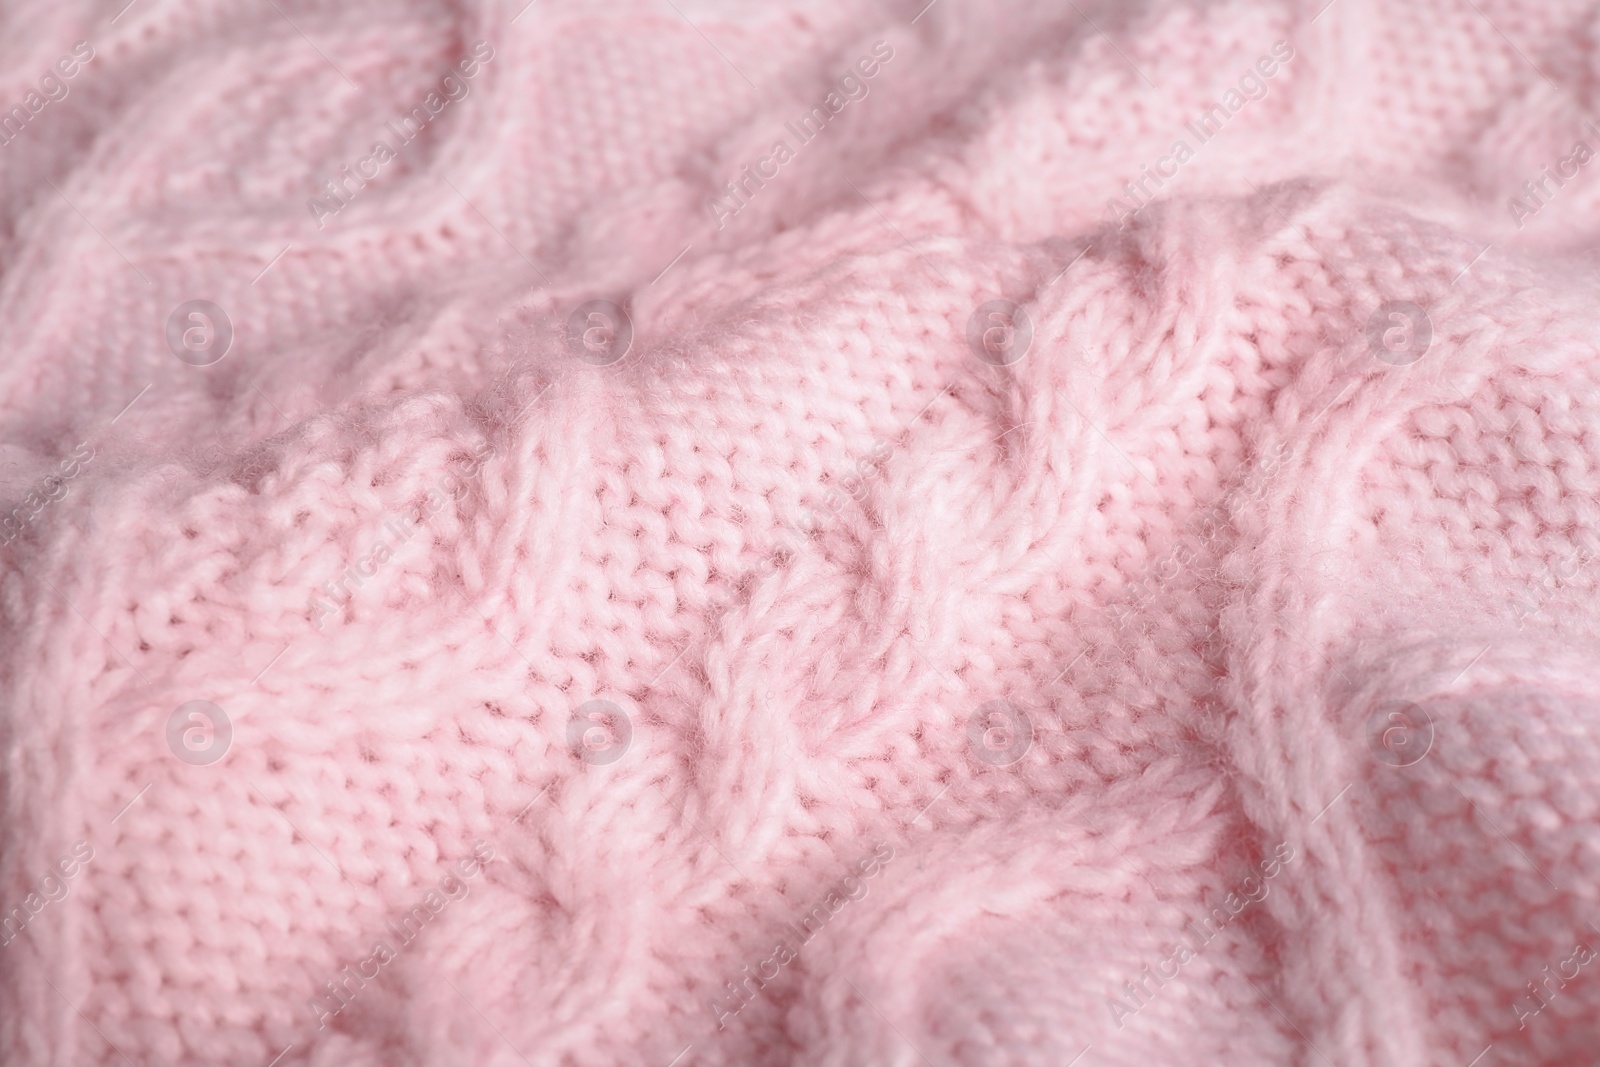 Photo of Pink knitted sweater as background, closeup view